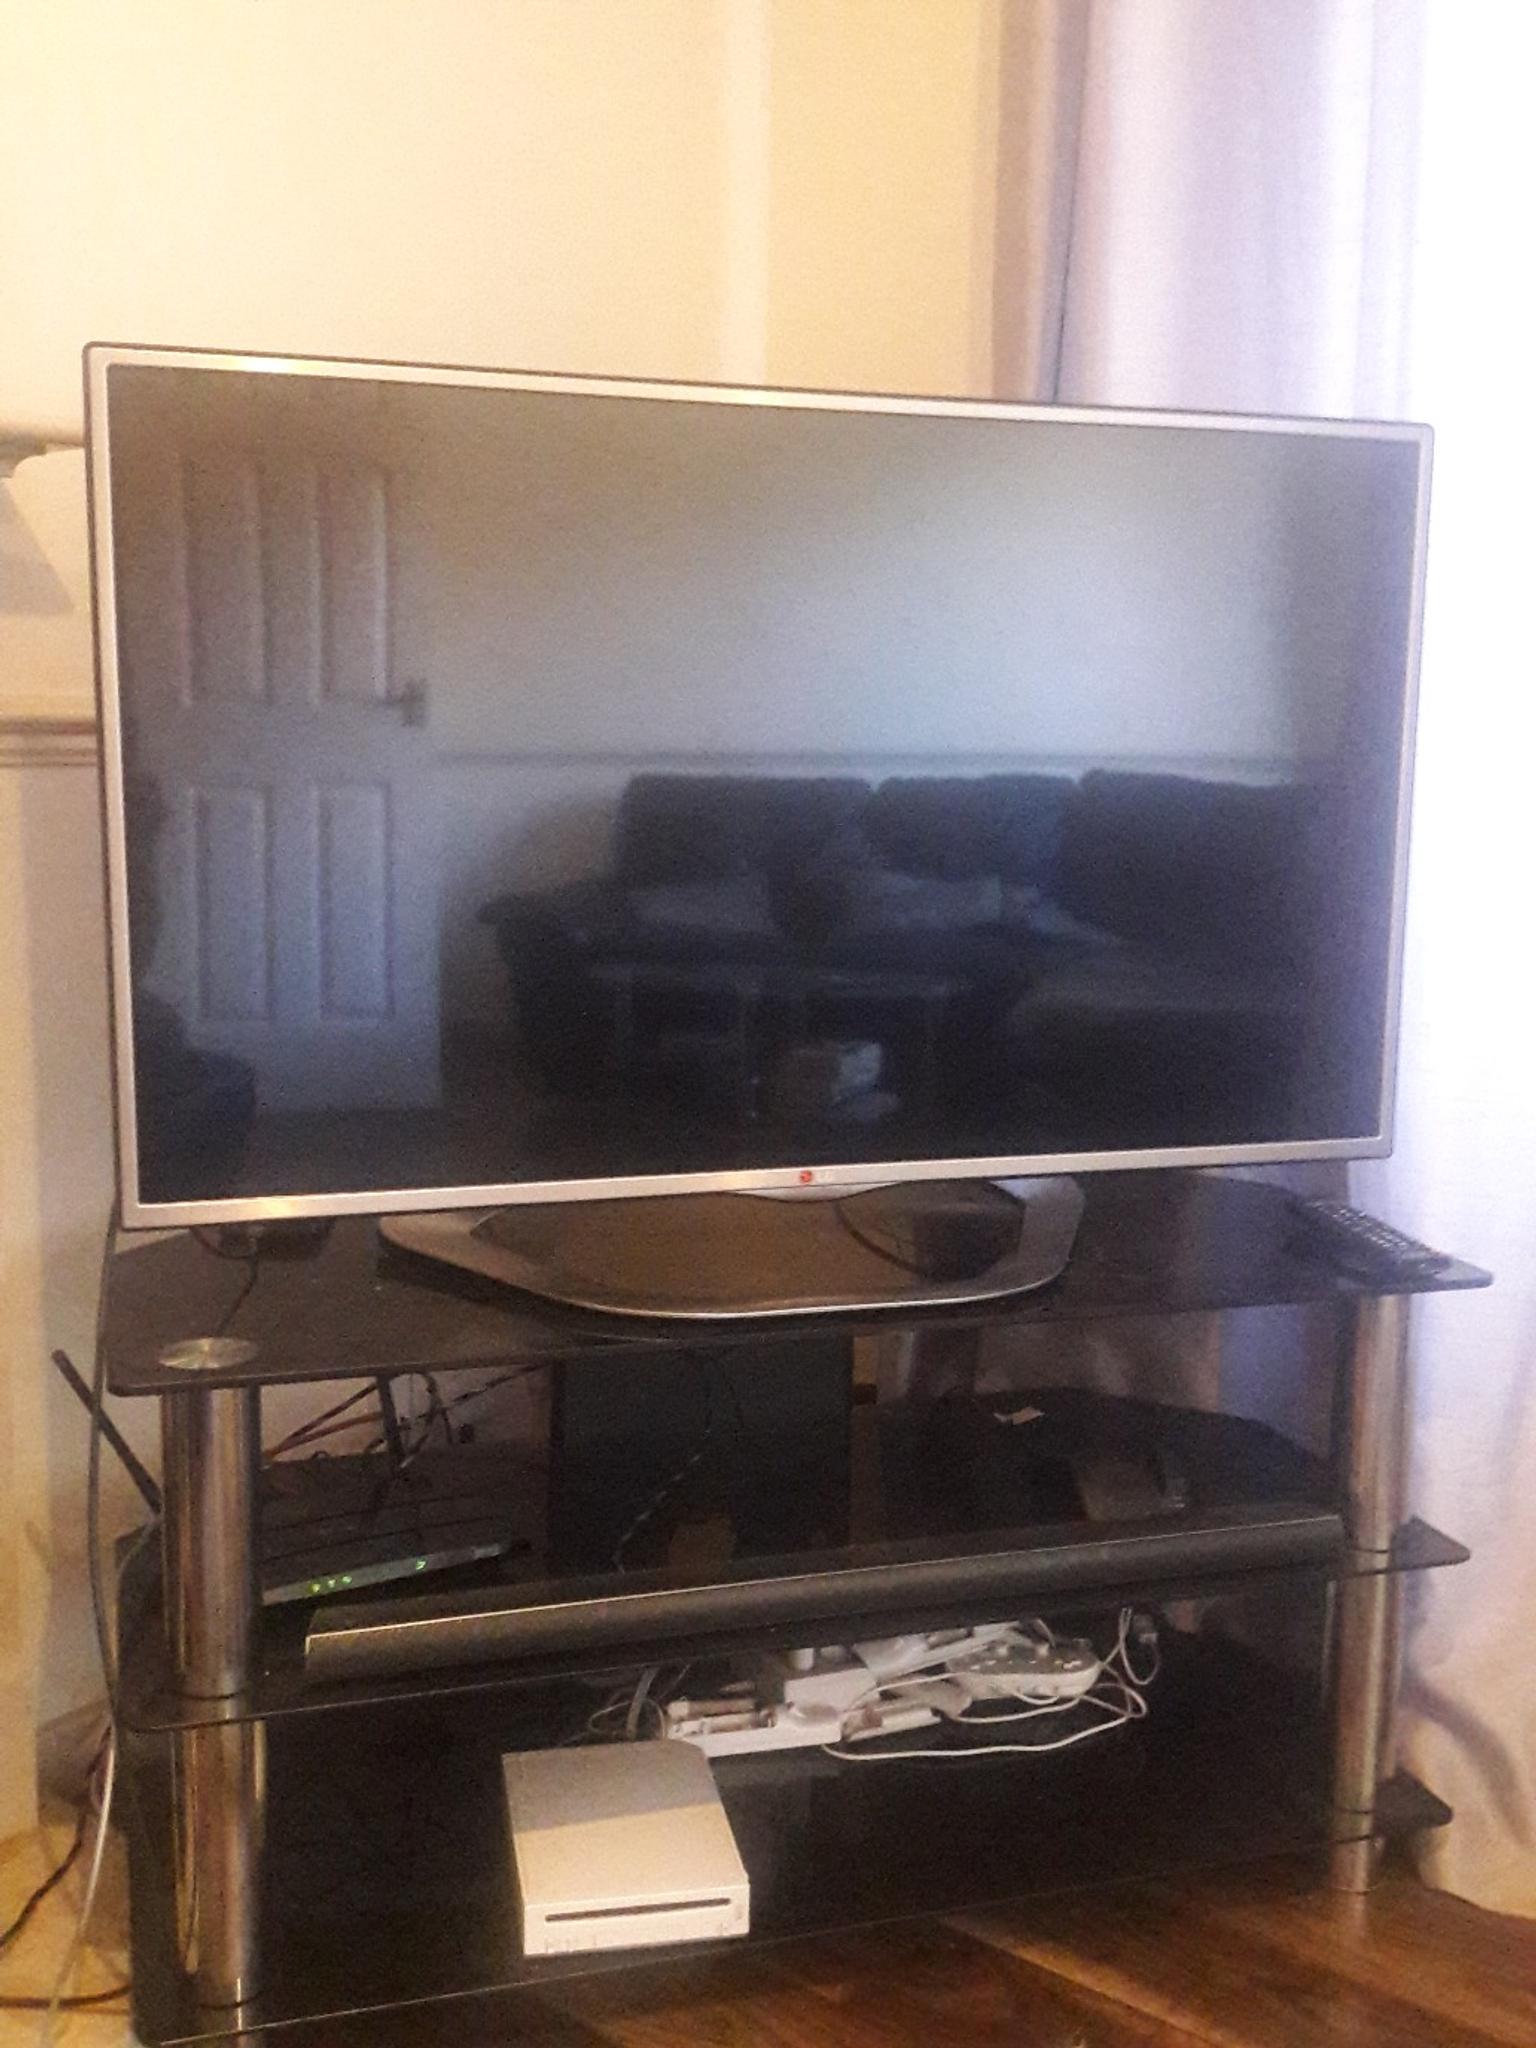 Lg Smart Tv 42 Inch Spares Or Repair In Melton For 50 00 For Sale